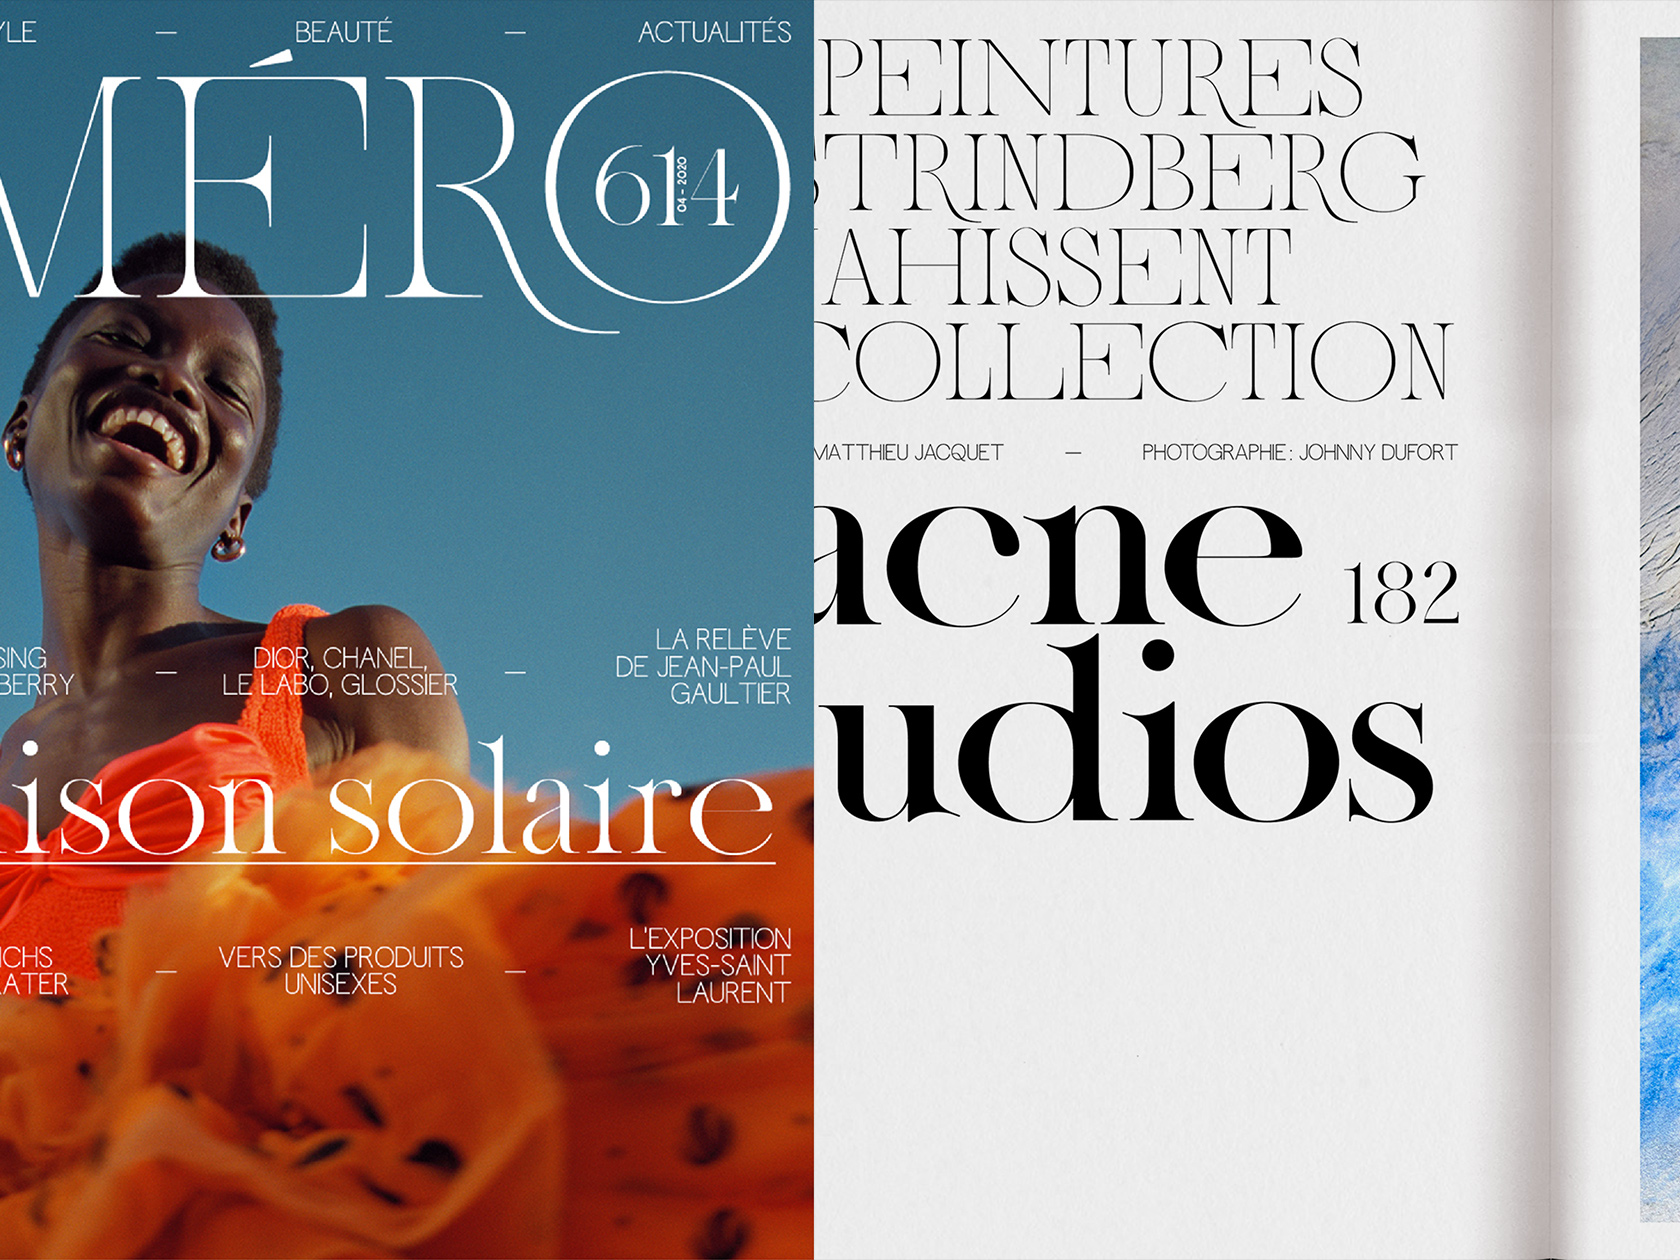 The typeface ‘Aliénor’ by Anne-Dauphine Borione and Lou Rainaldo is a mixture of elegance and extravagance